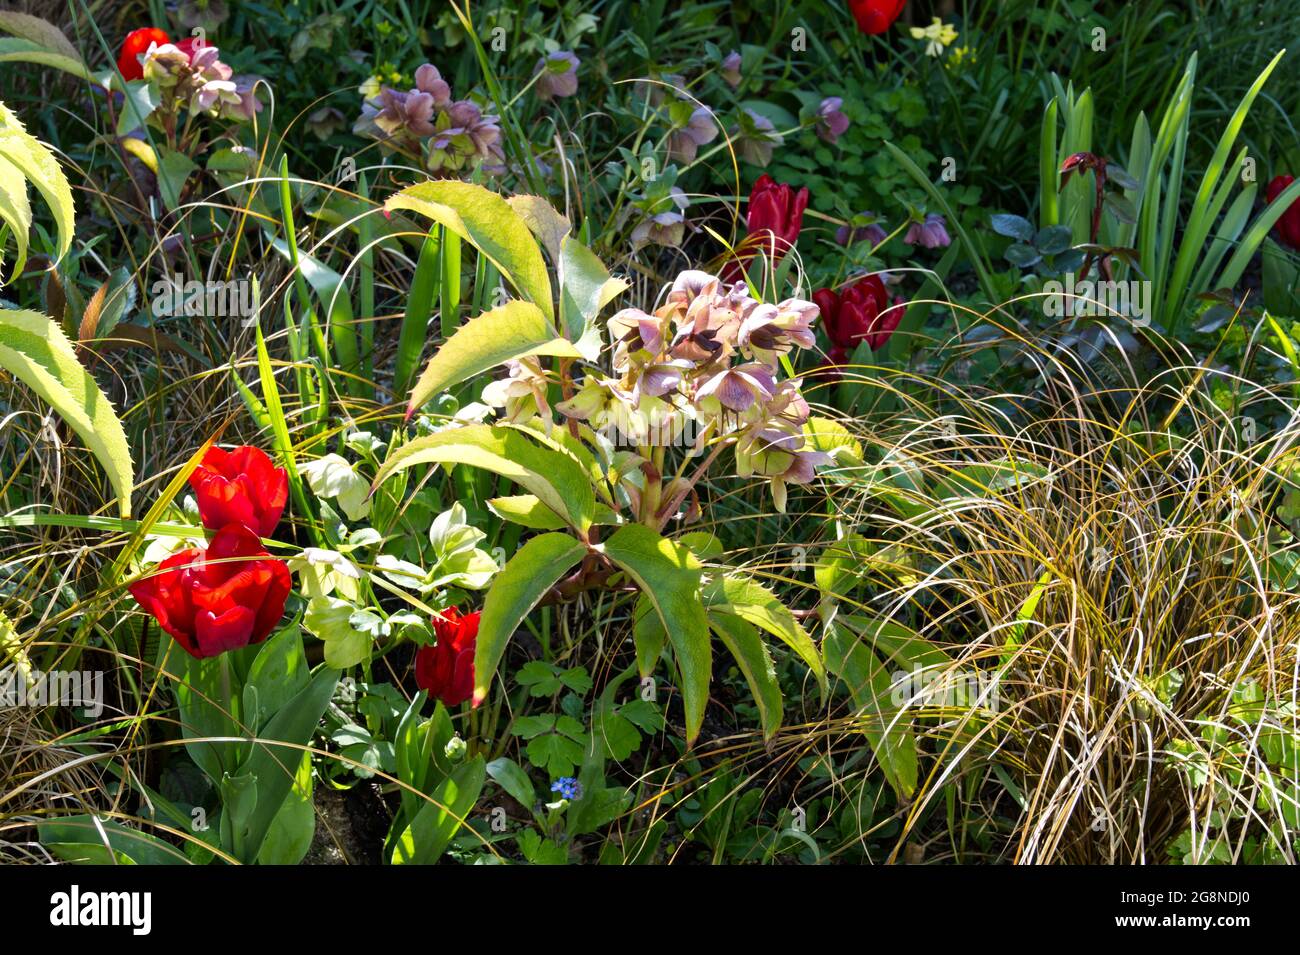 Red Tulip Seadov flowers, hellebore Sternii and bronze carex grass in a spring garden. April UK Stock Photo